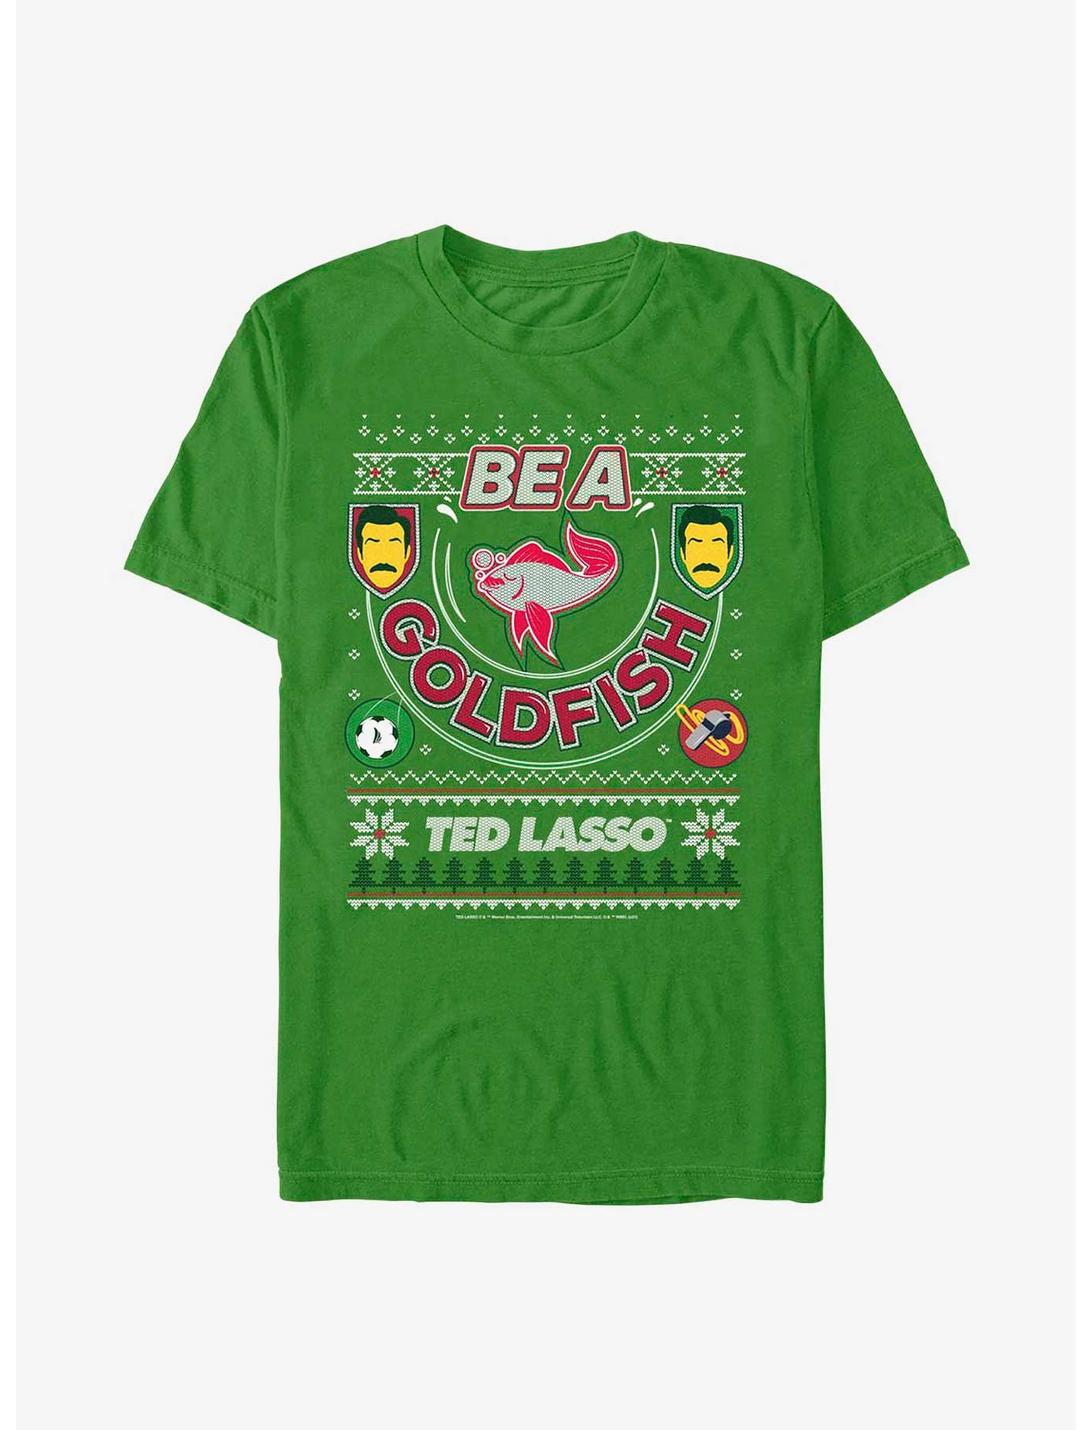 Plus Size Ted Lasso Be A Goldfish Ugly Sweater T-Shirt, KELLY, hi-res